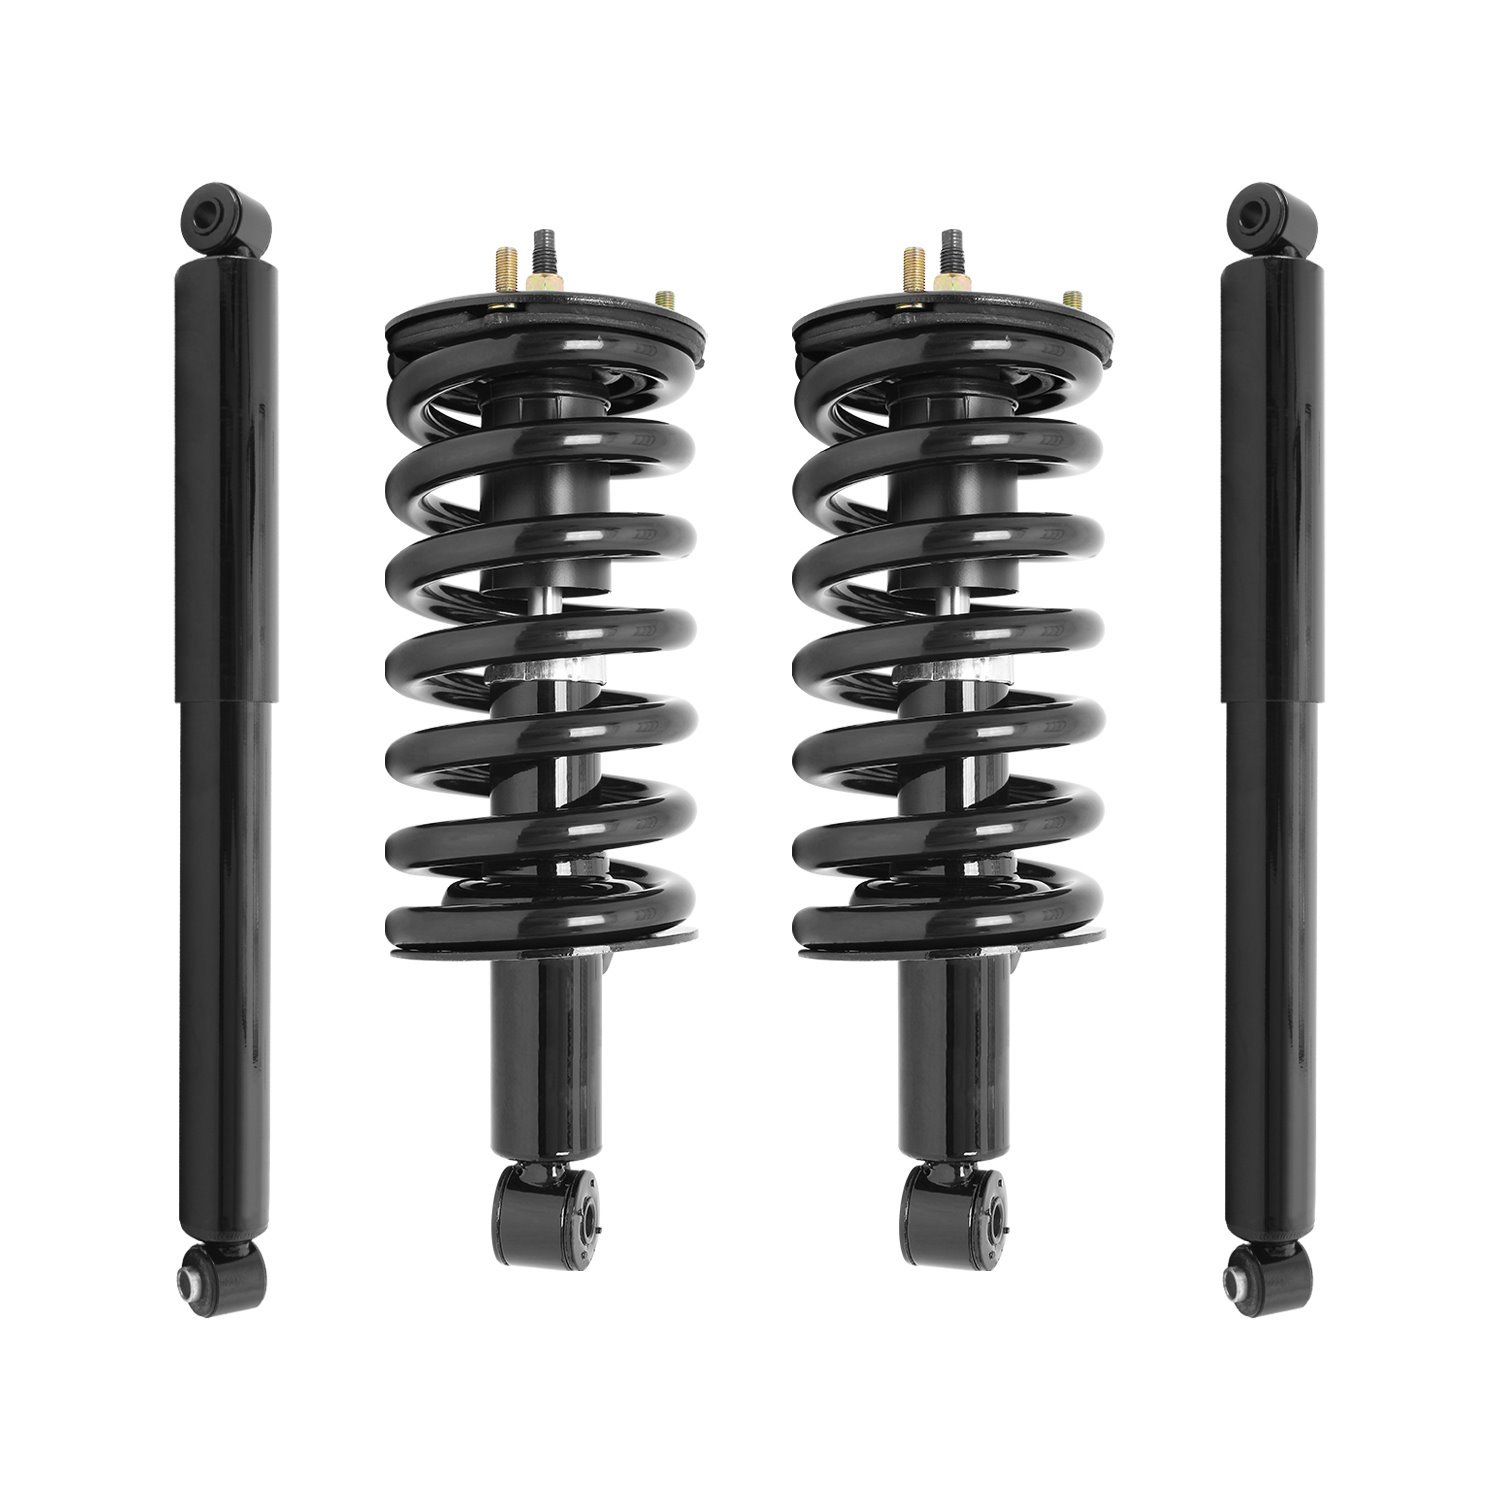 4-11302-255500-001 Front & Rear Suspension Strut & Coil Spring Assembly Fits Select Nissan TITAN